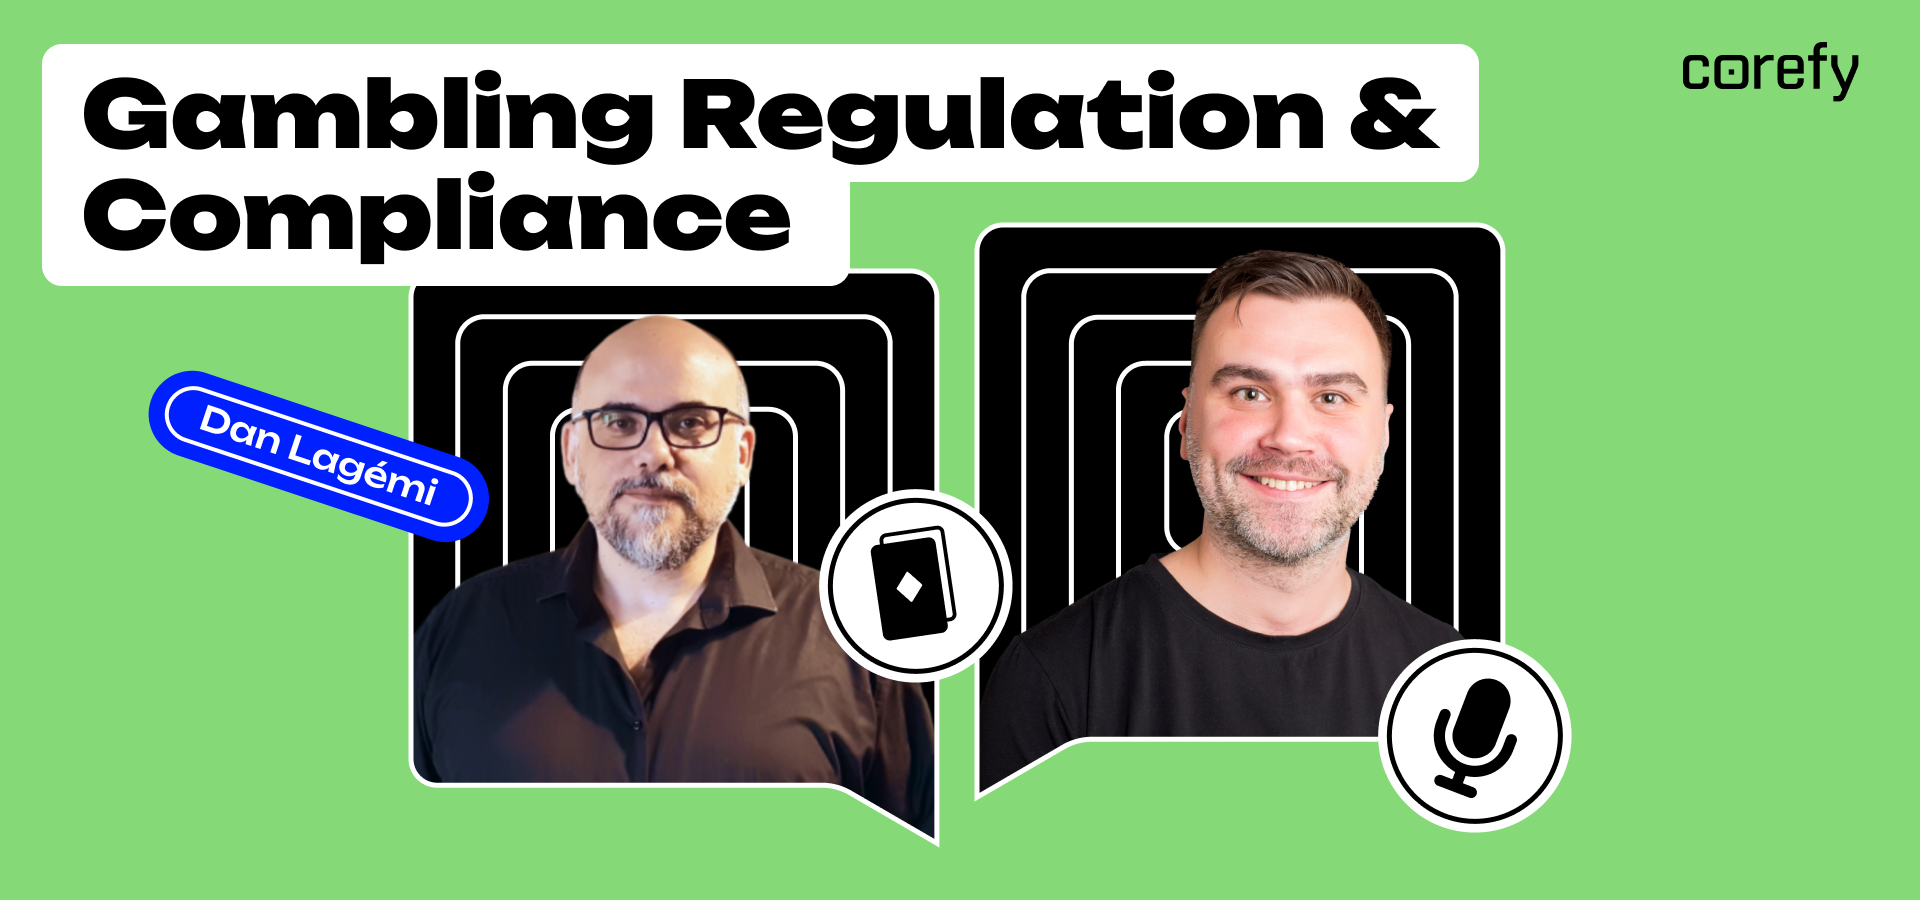 Payment regulation & compliance for gambling